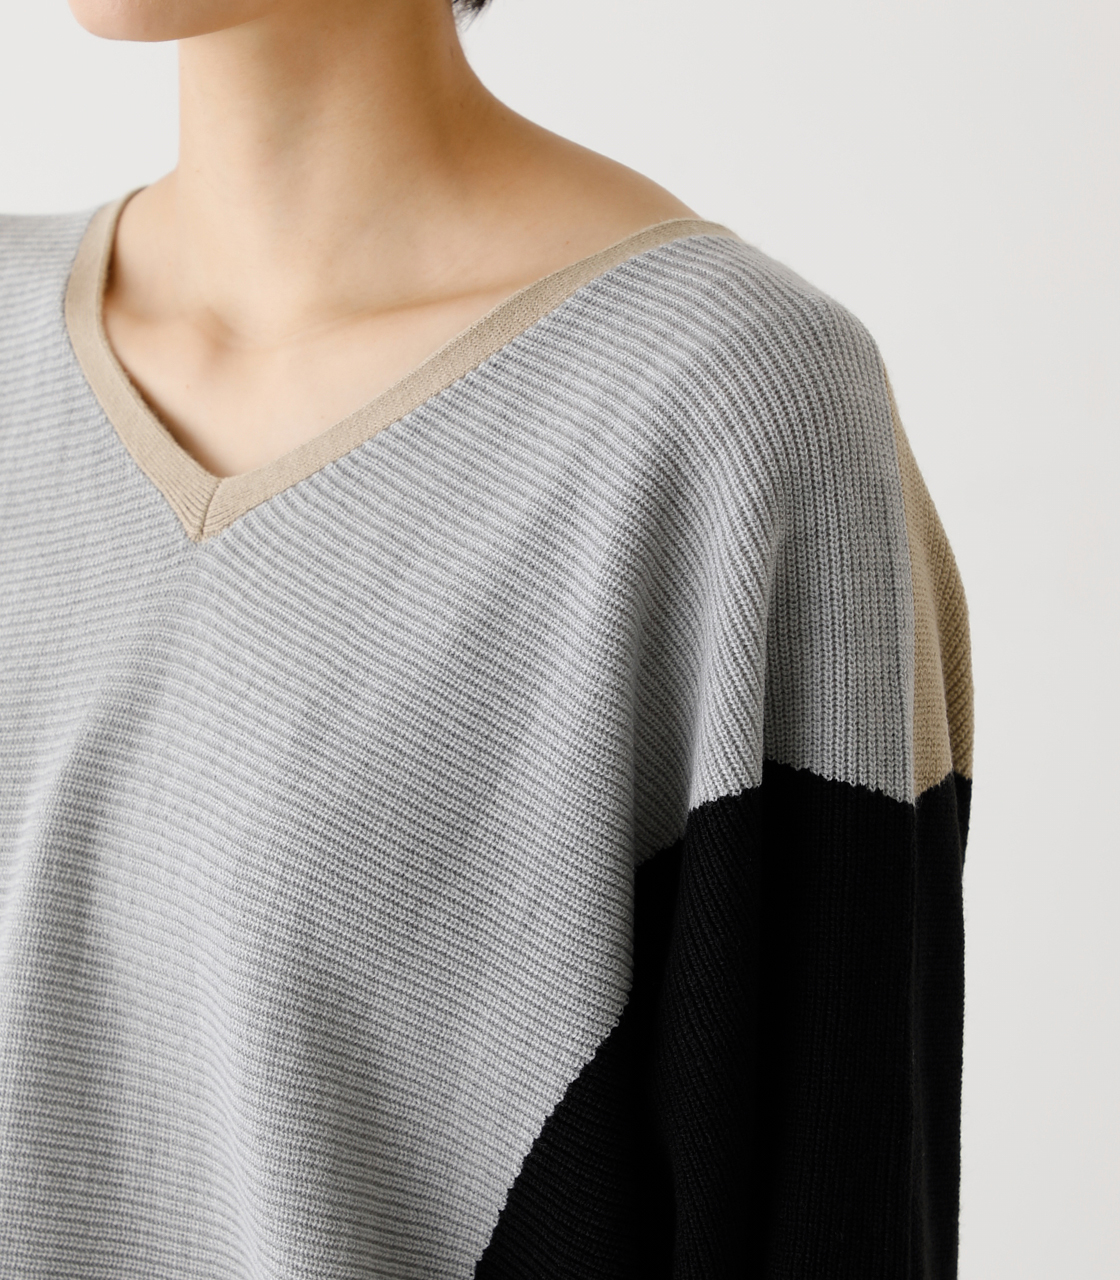 NUDIE DOLMAN KNIT TOPS/ヌーディードルマンニットトップス 詳細画像 柄GRY 8